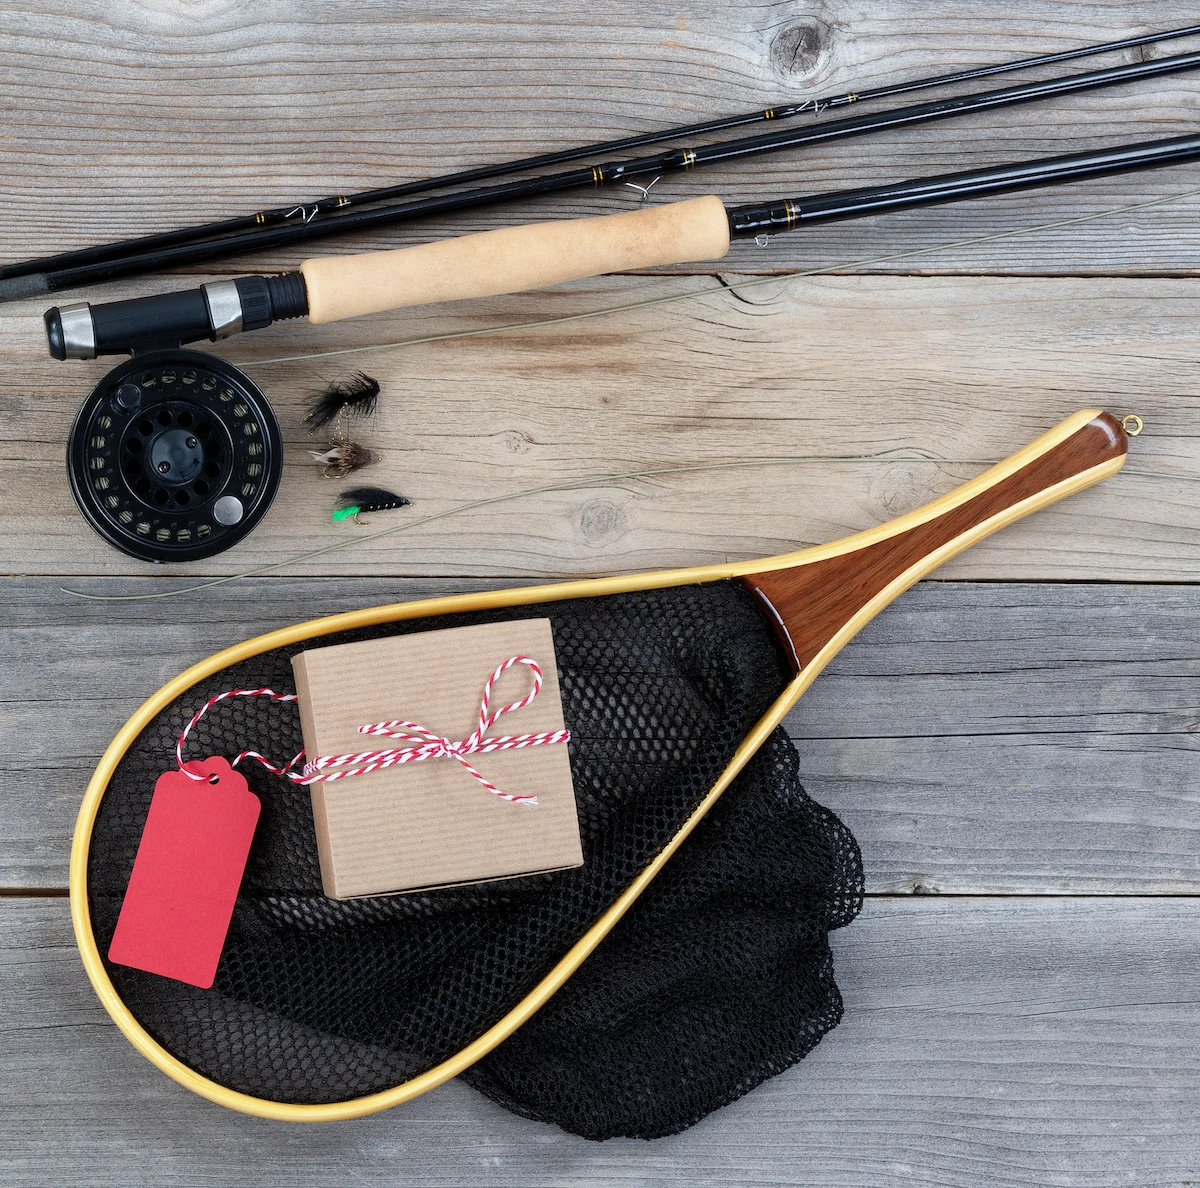 Fly rod and net with a wrapped package